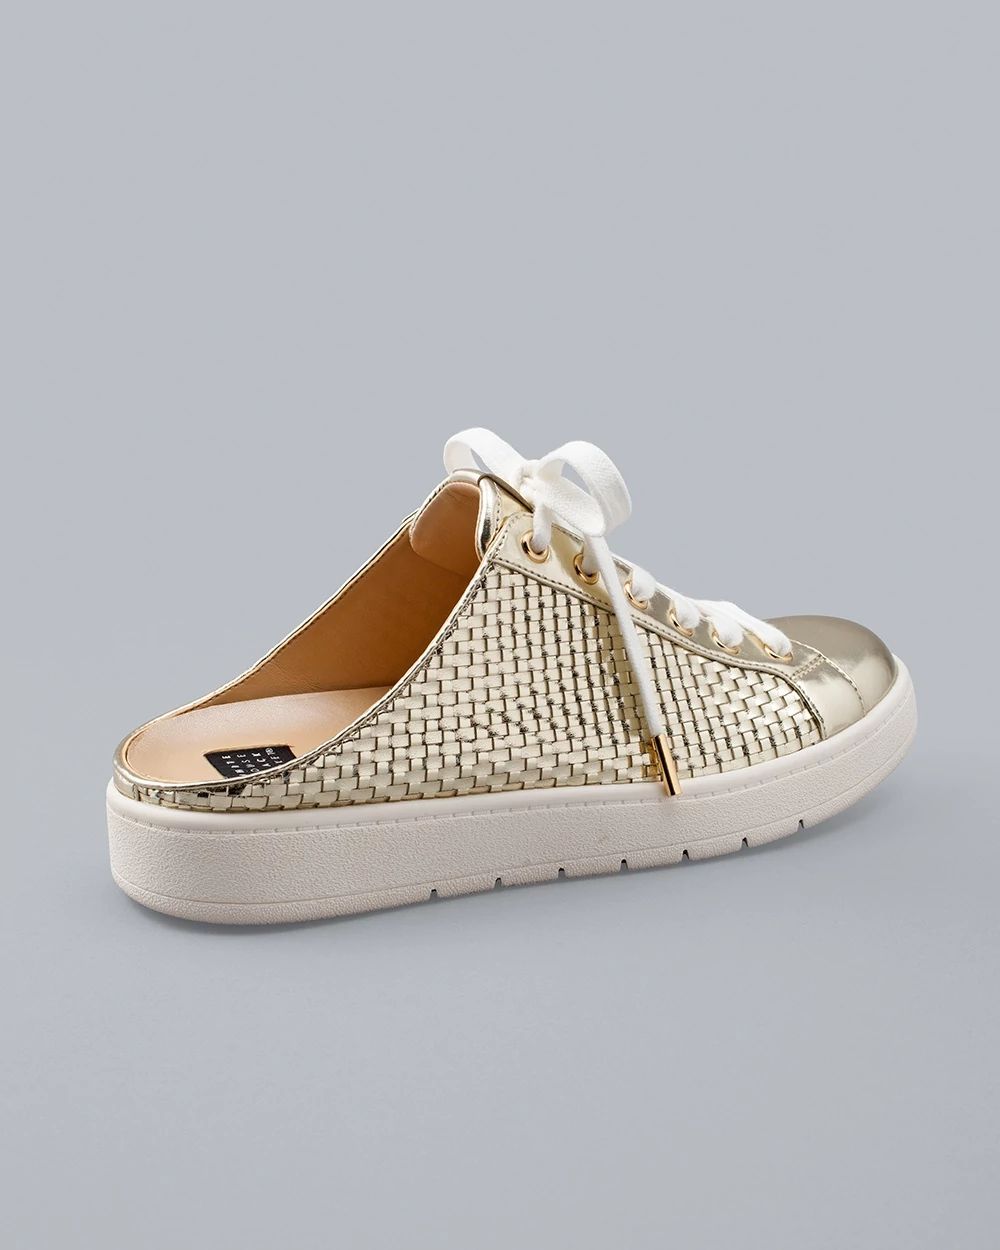 WHBM Kicks Quilted Metallic Mule Sneakers click to view larger image.